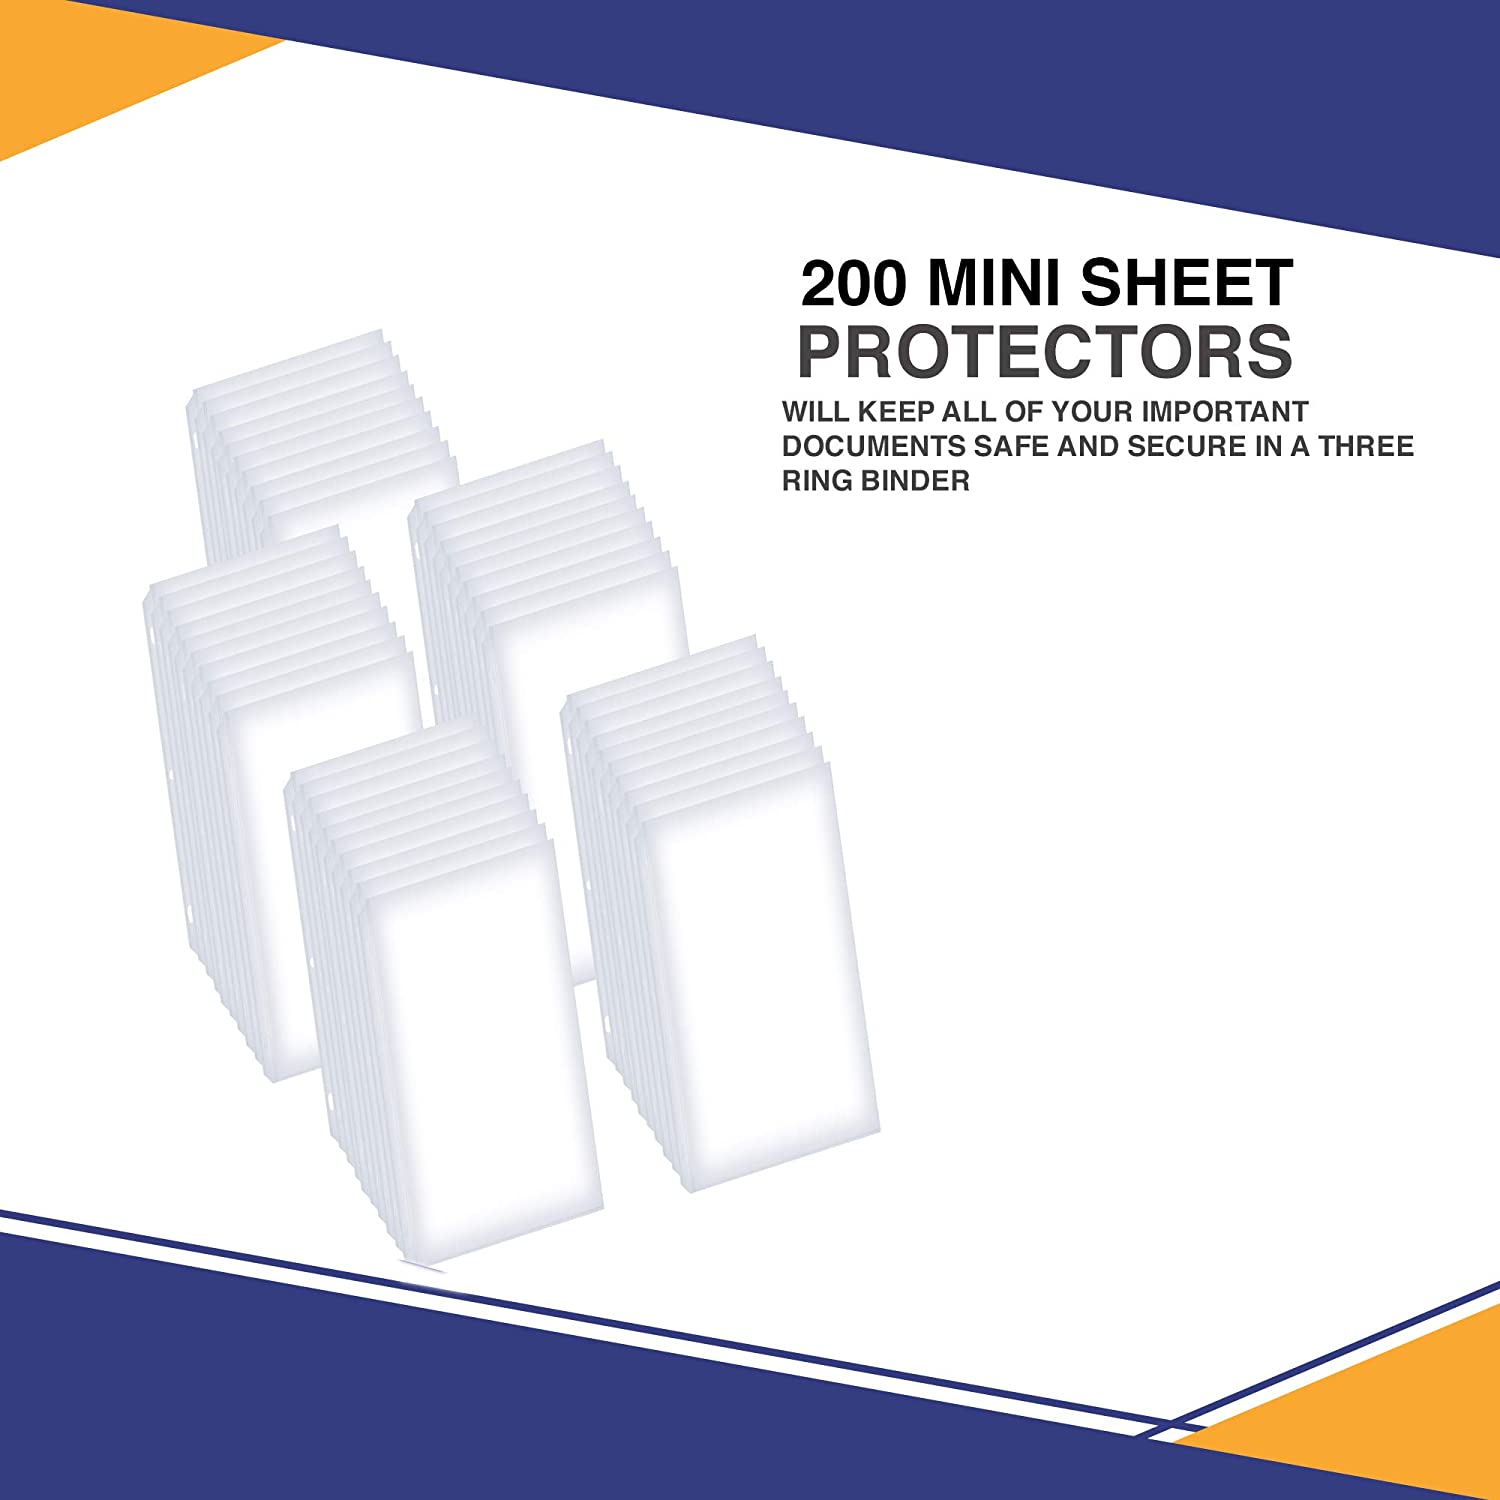 Legal Size Clear Plastic Sheet Protectors, Archival Quality for Binders Documents (Pack of 10)